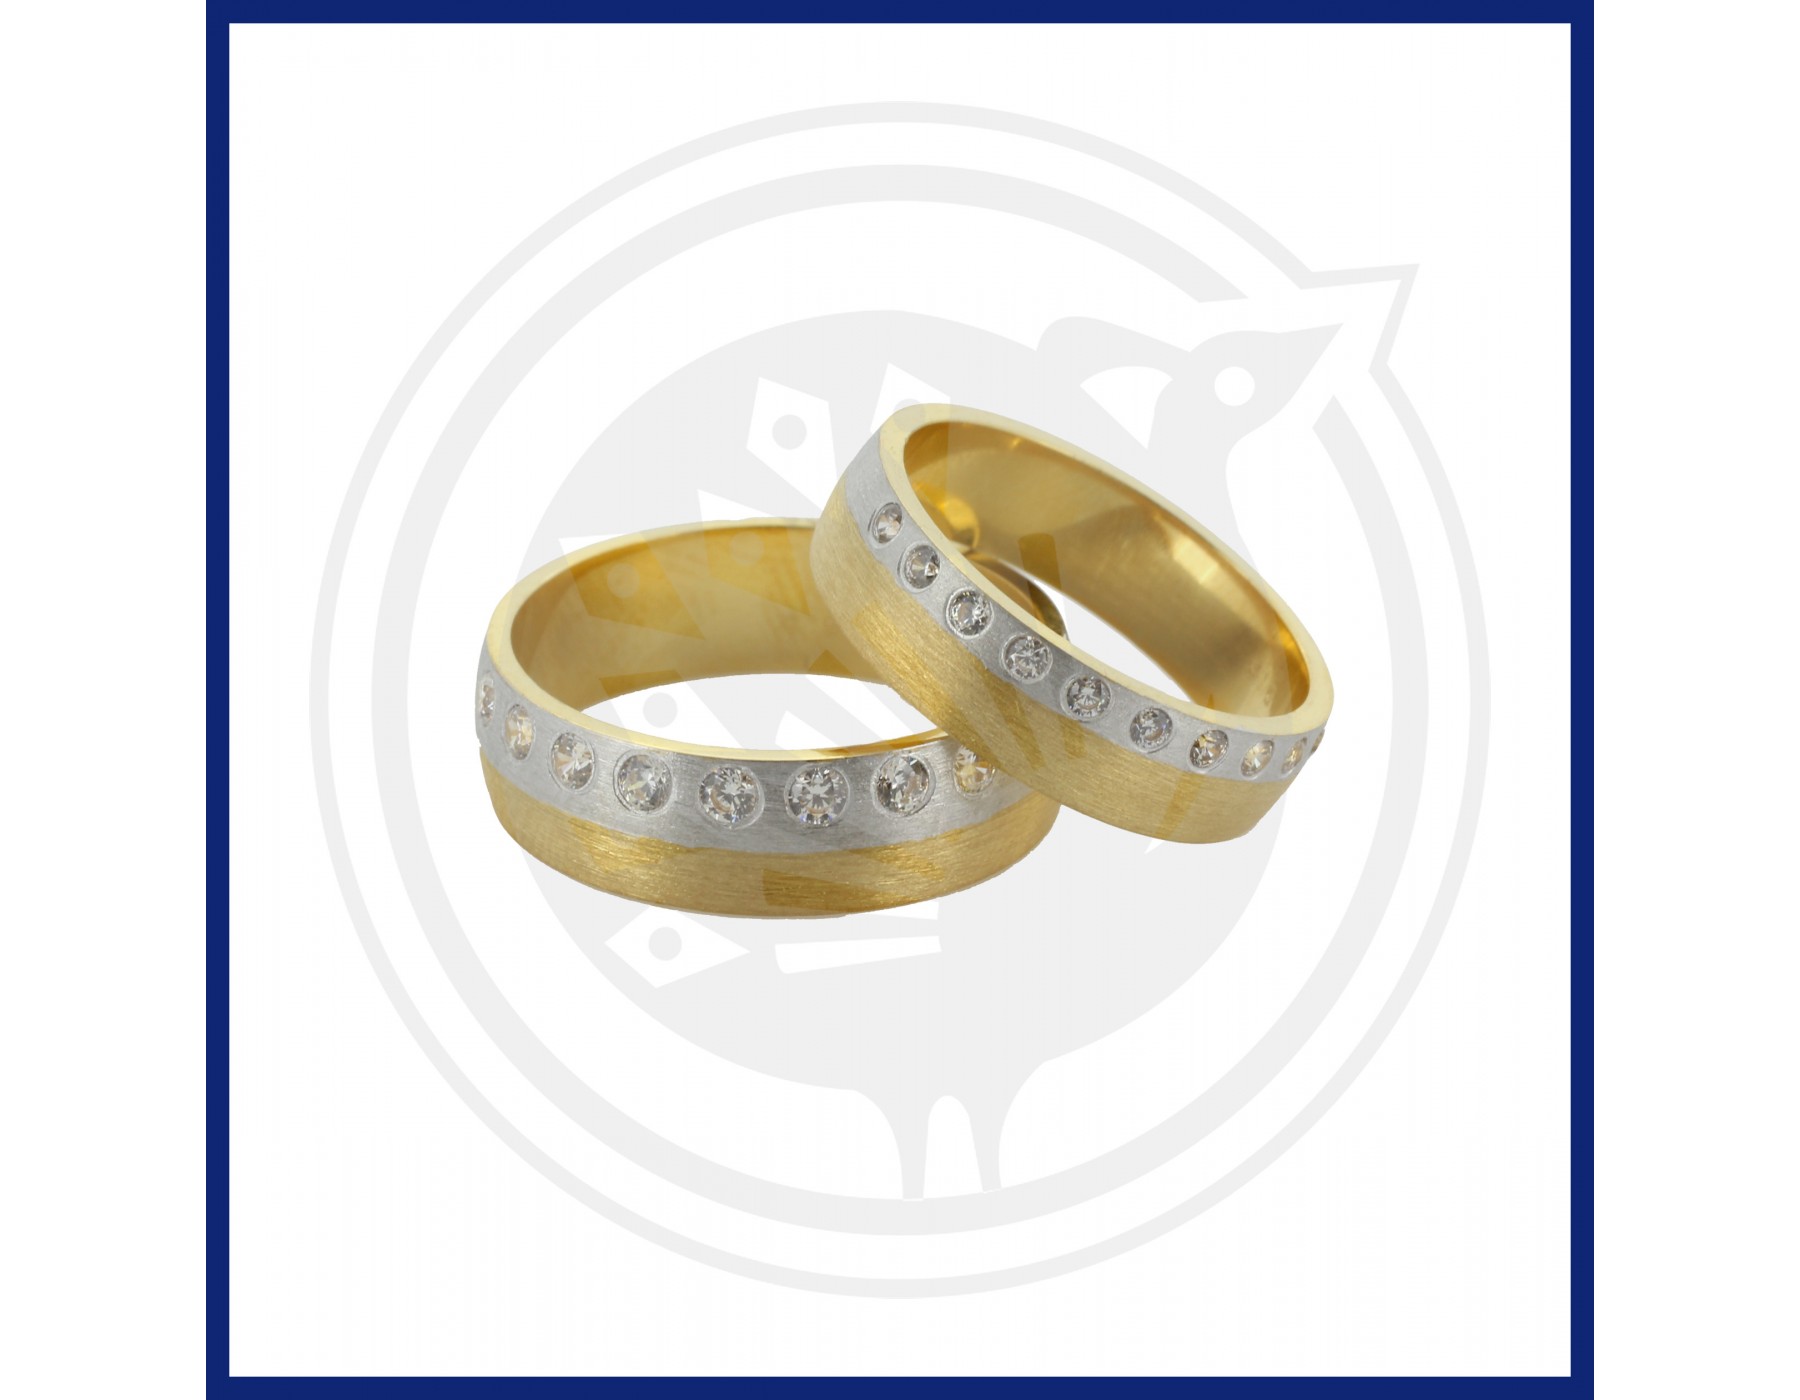 ring design gold for marriage / 2gm new Rings Designs gold jewellery -  YouTube